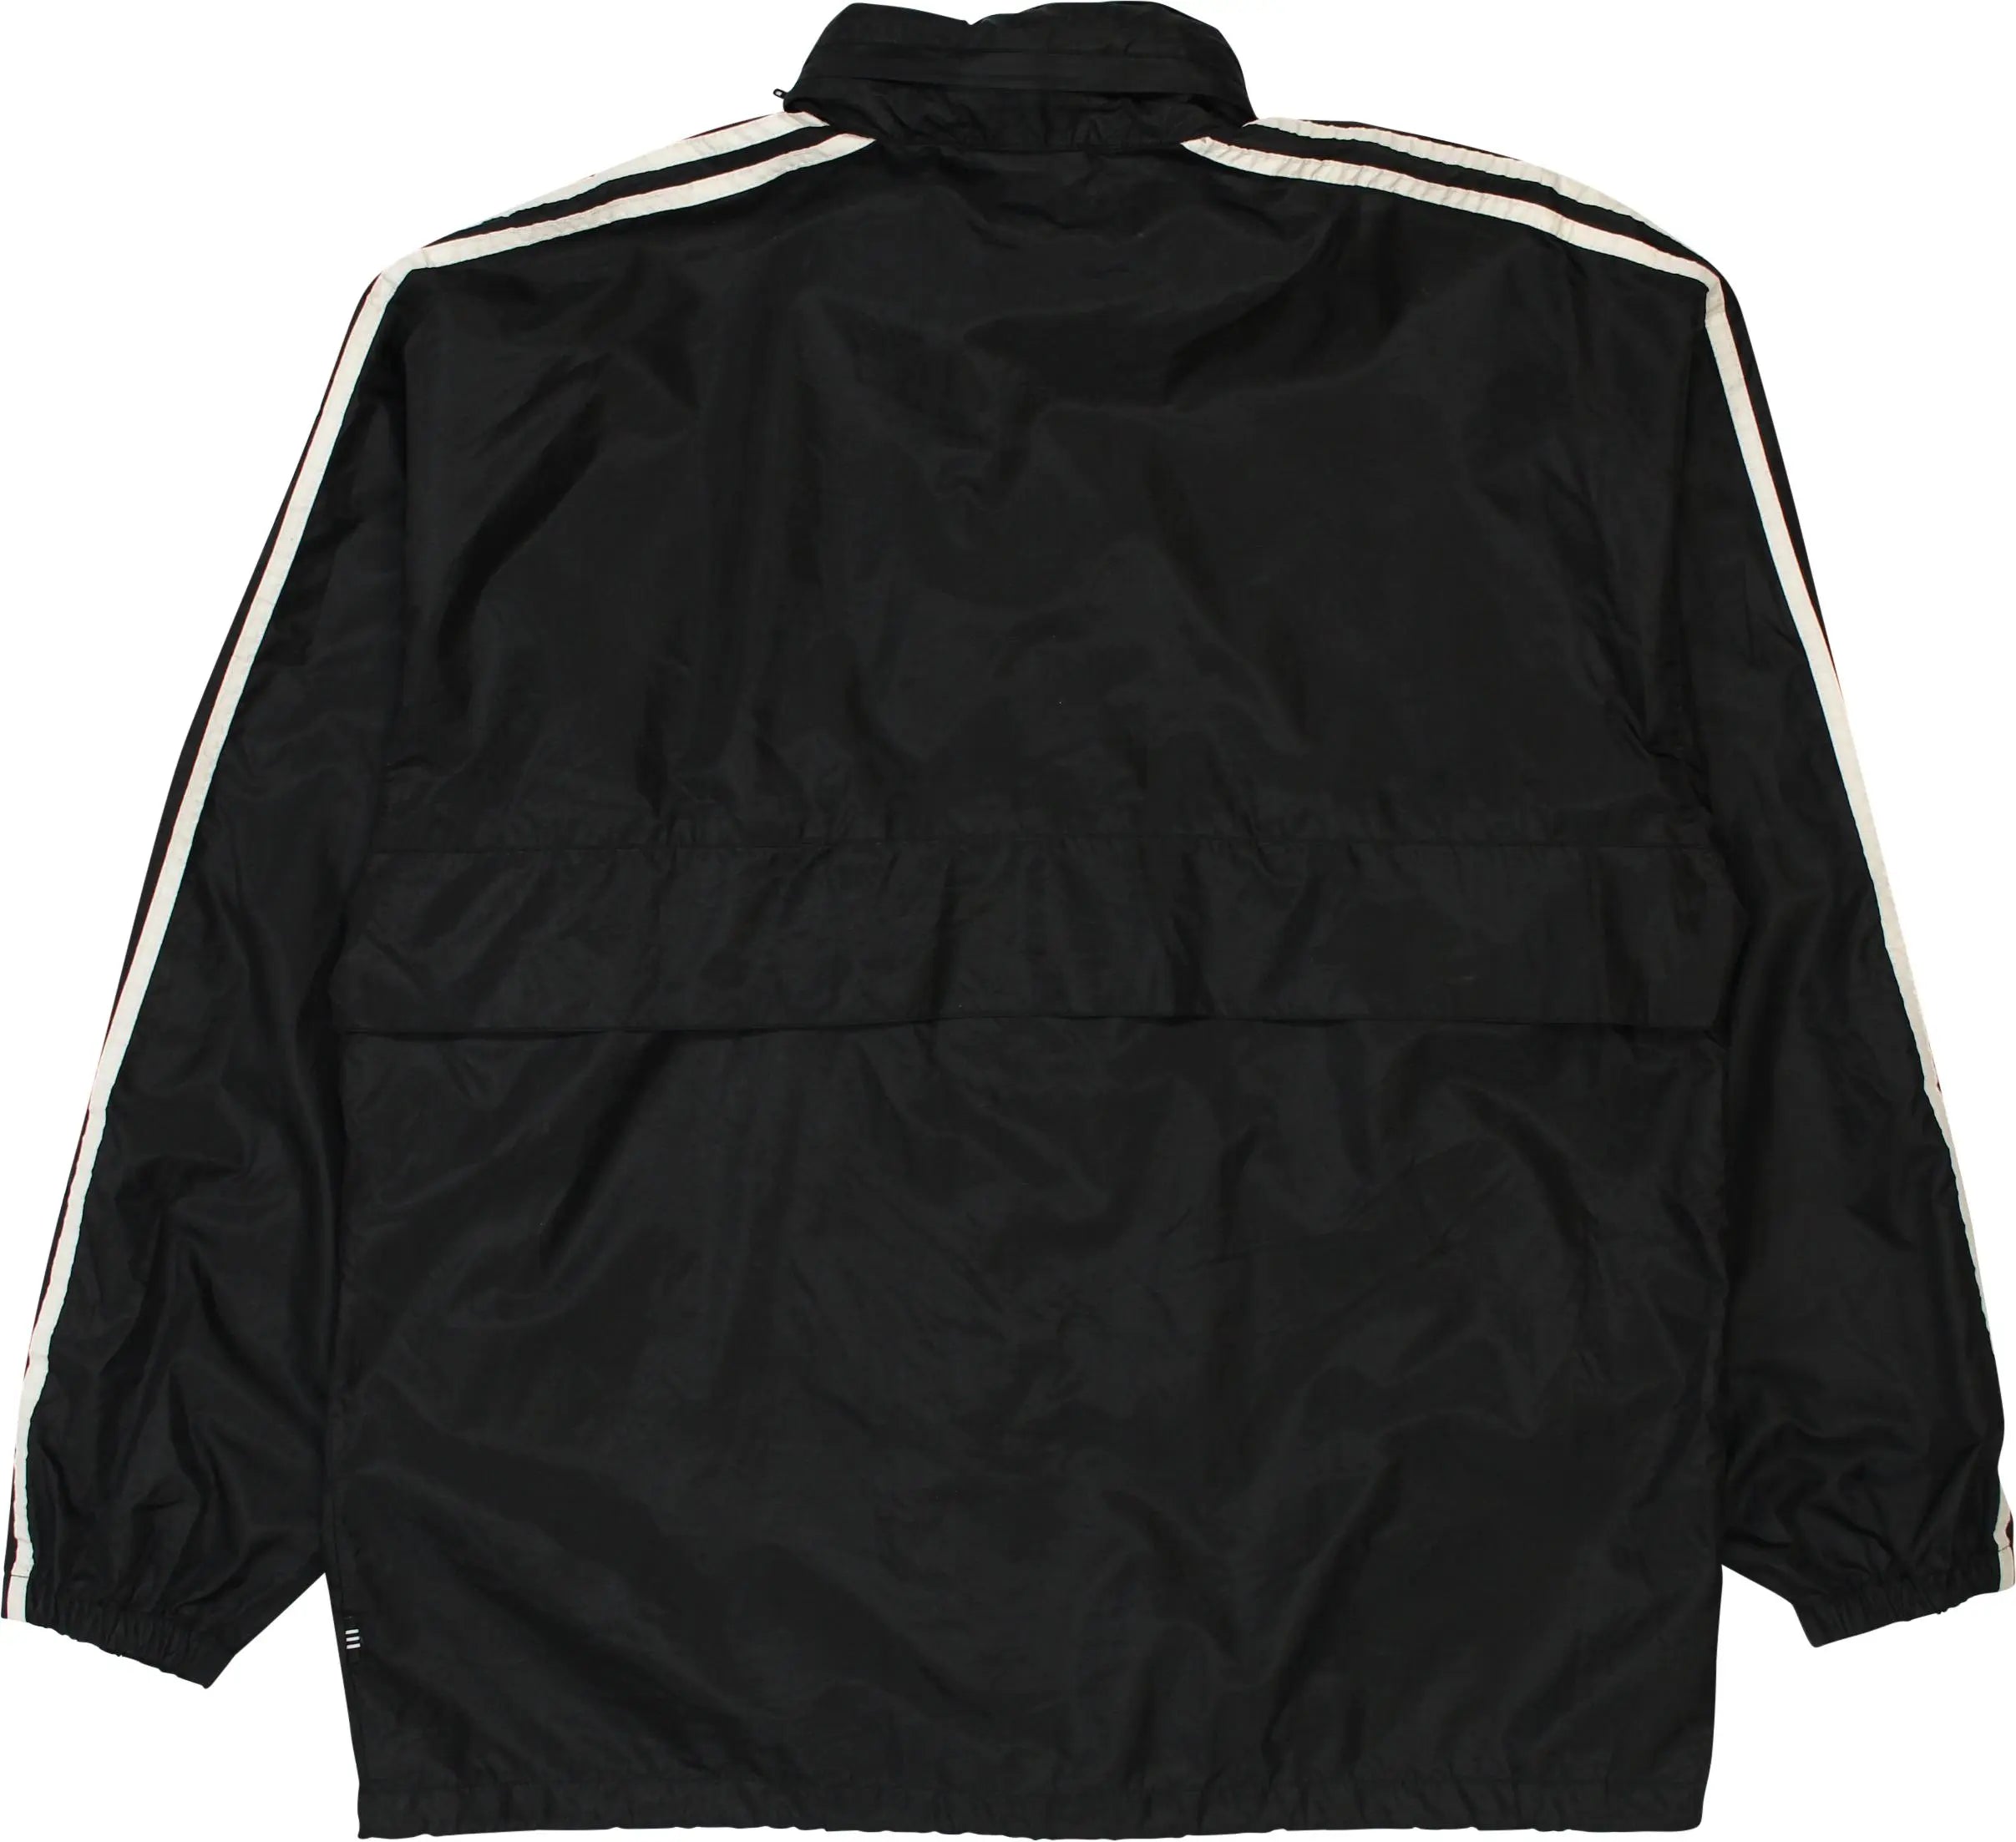 Adidas - Black Rain Jacket & Pants by Adidas- ThriftTale.com - Vintage and second handclothing